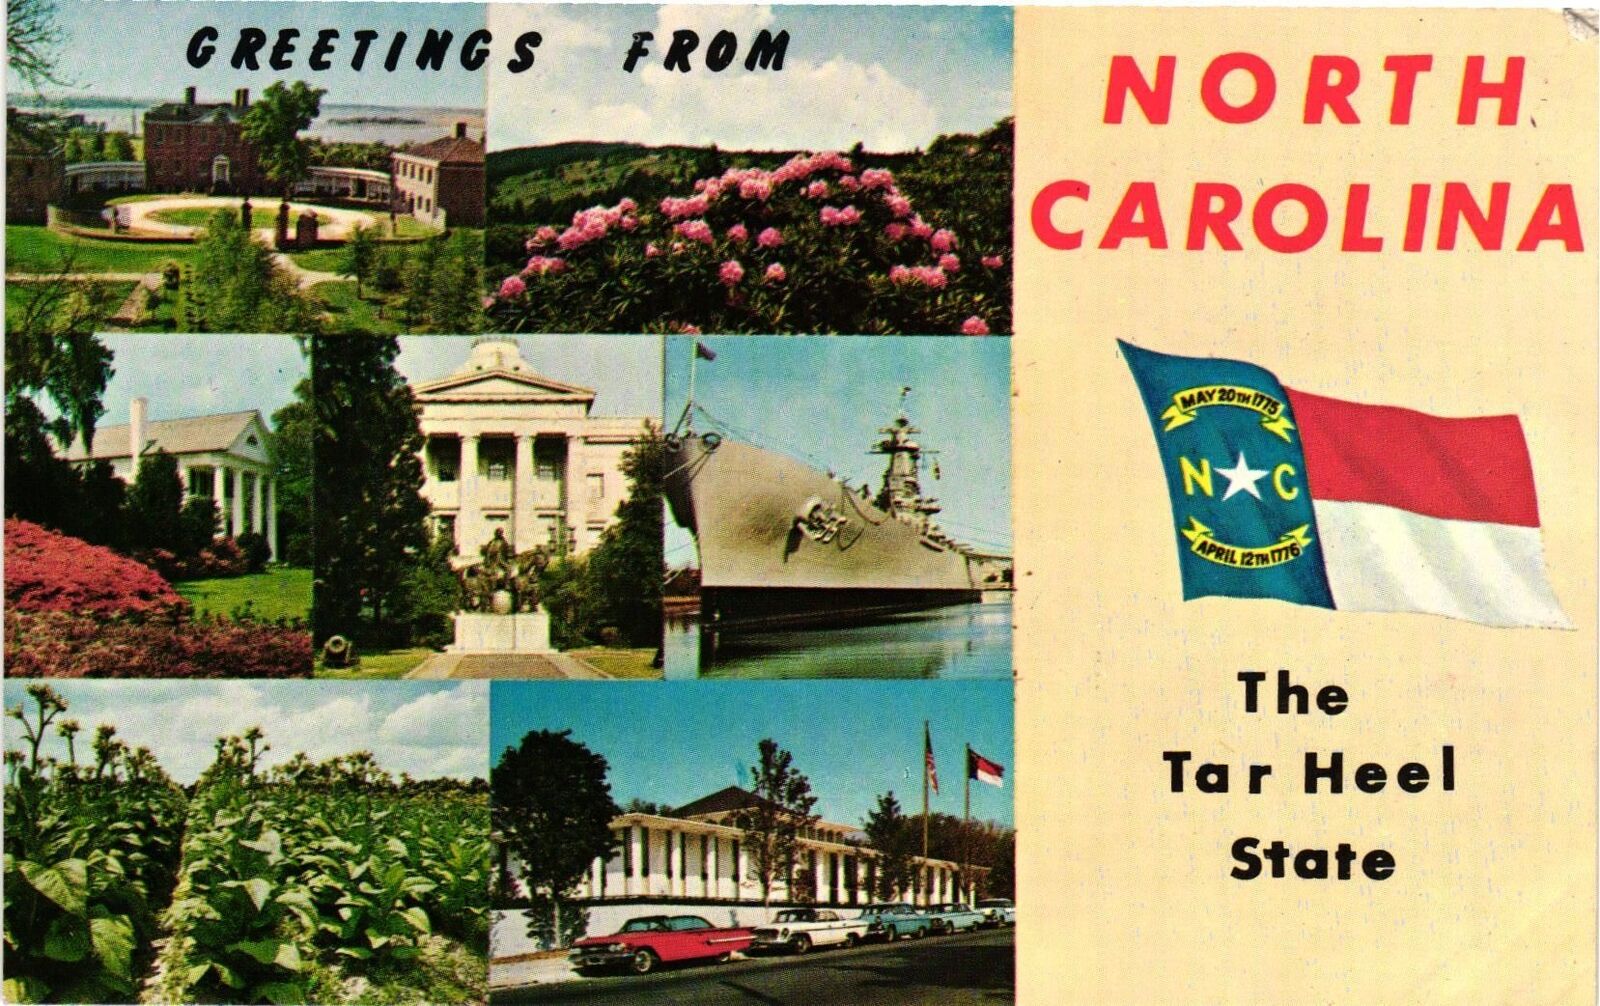 Vintage Postcard- Attractions, Greetings from, NC 1960s